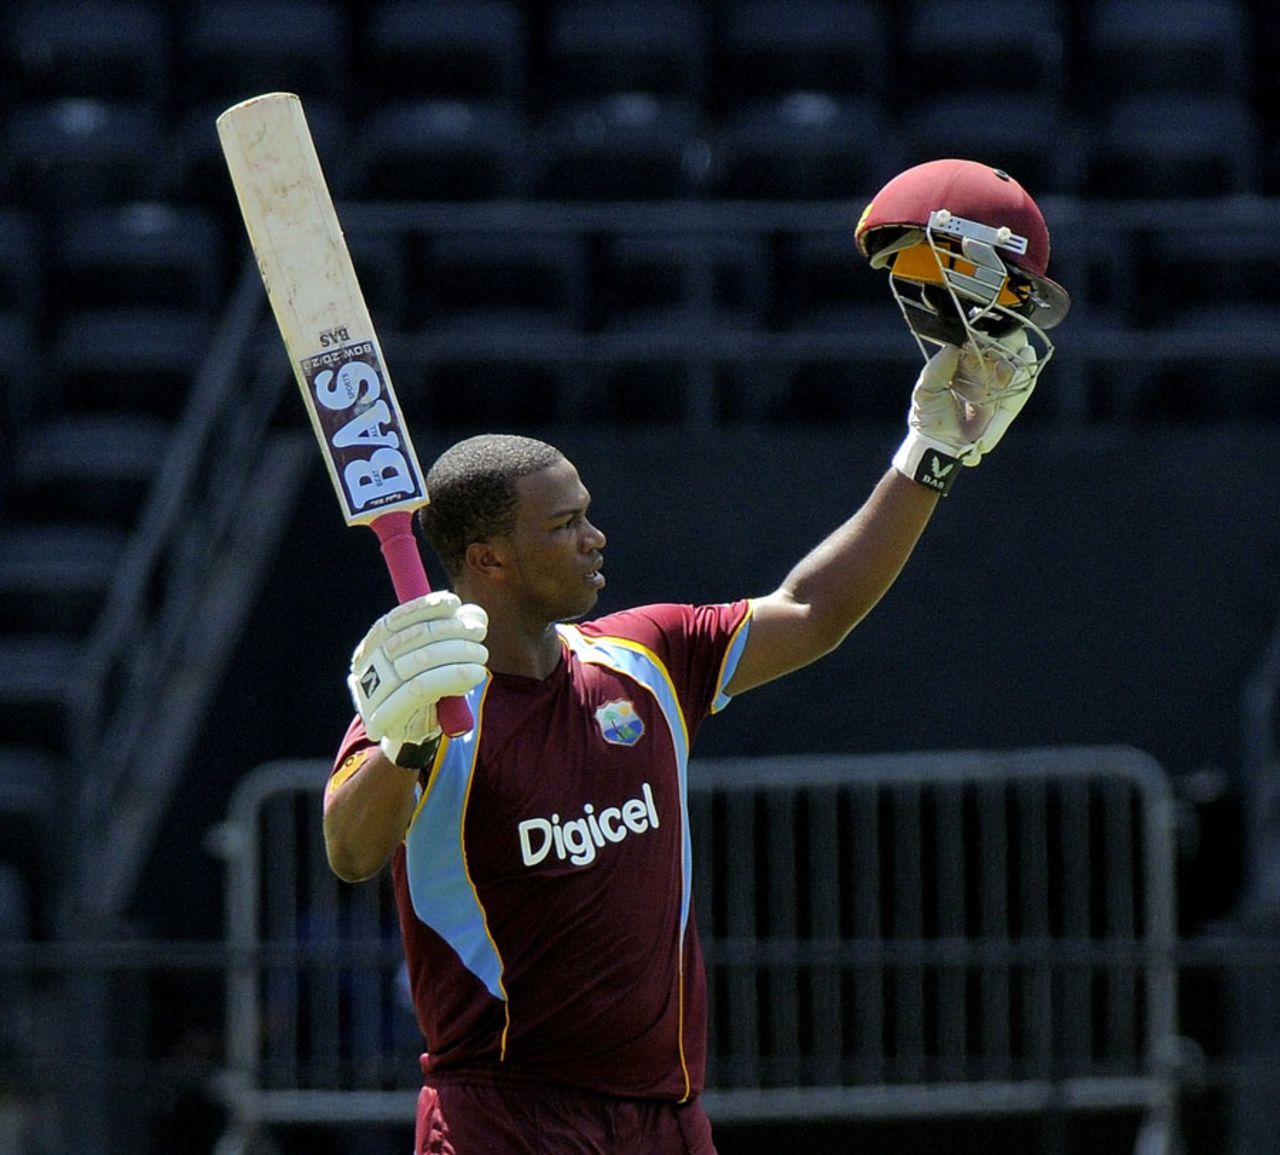 Johnson Charles raises his bat after completing an aggressive century, West Indies v Zimbabwe, 1st ODI, Grenada, February 22, 2013